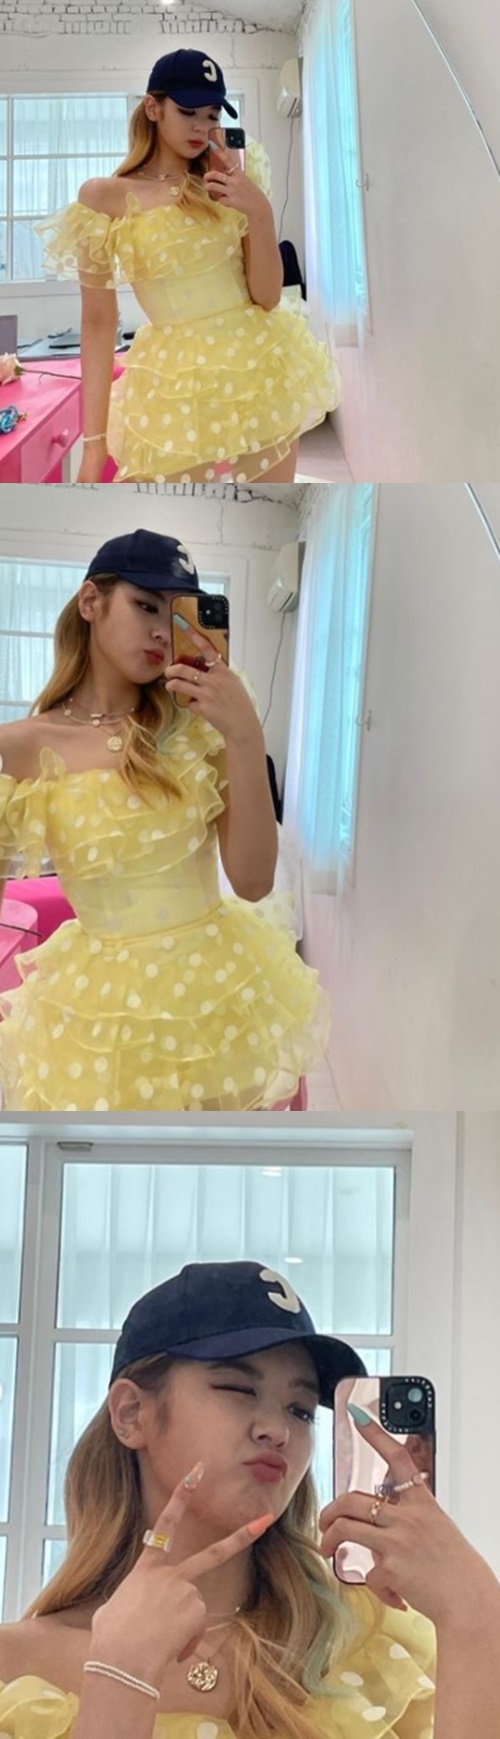 Girl group ITZY member Lia has released a selfie.On the 14th, ITZY official SNS posted a number of photos of Lia along with Pics from LOCO photoshoot.The photo shows Lia posing in a yellow dress.Lia, who boasts a colorful look, has an open expression and a chic look that captivated fans.On the other hand, ITZY, which Lia belongs to, released CRAZY IN LOVE on September 24th.